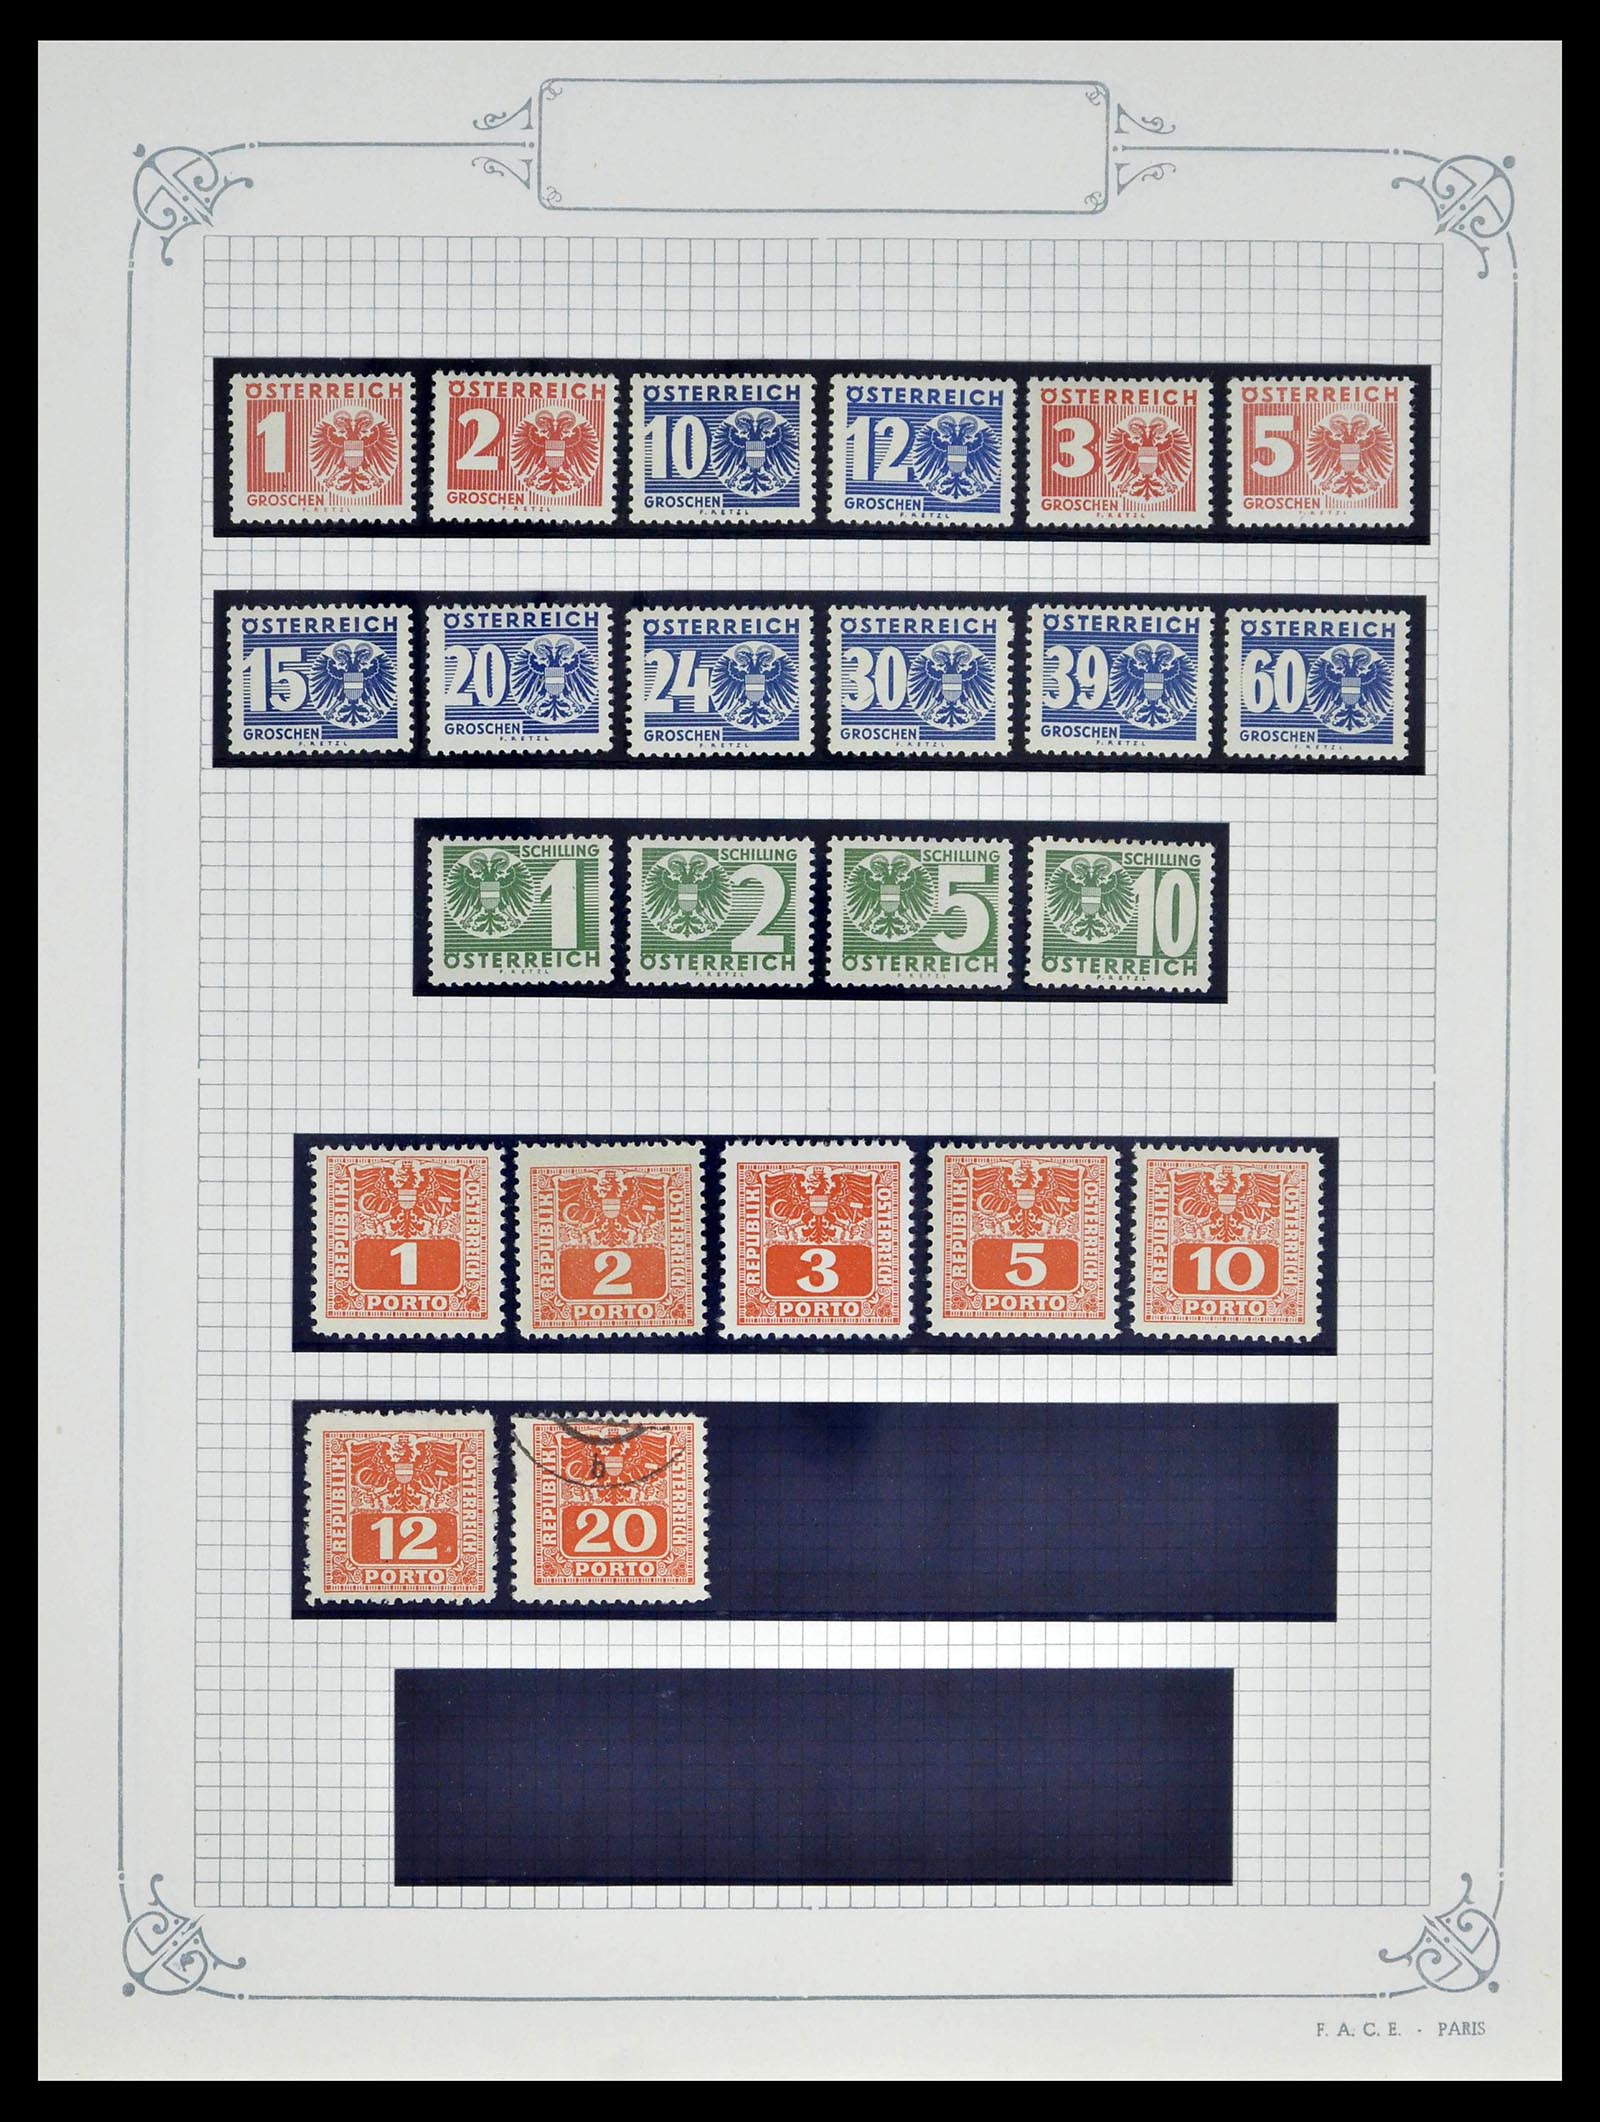 39276 0123 - Stamp collection 39276 Austria and territories 1850-1979.